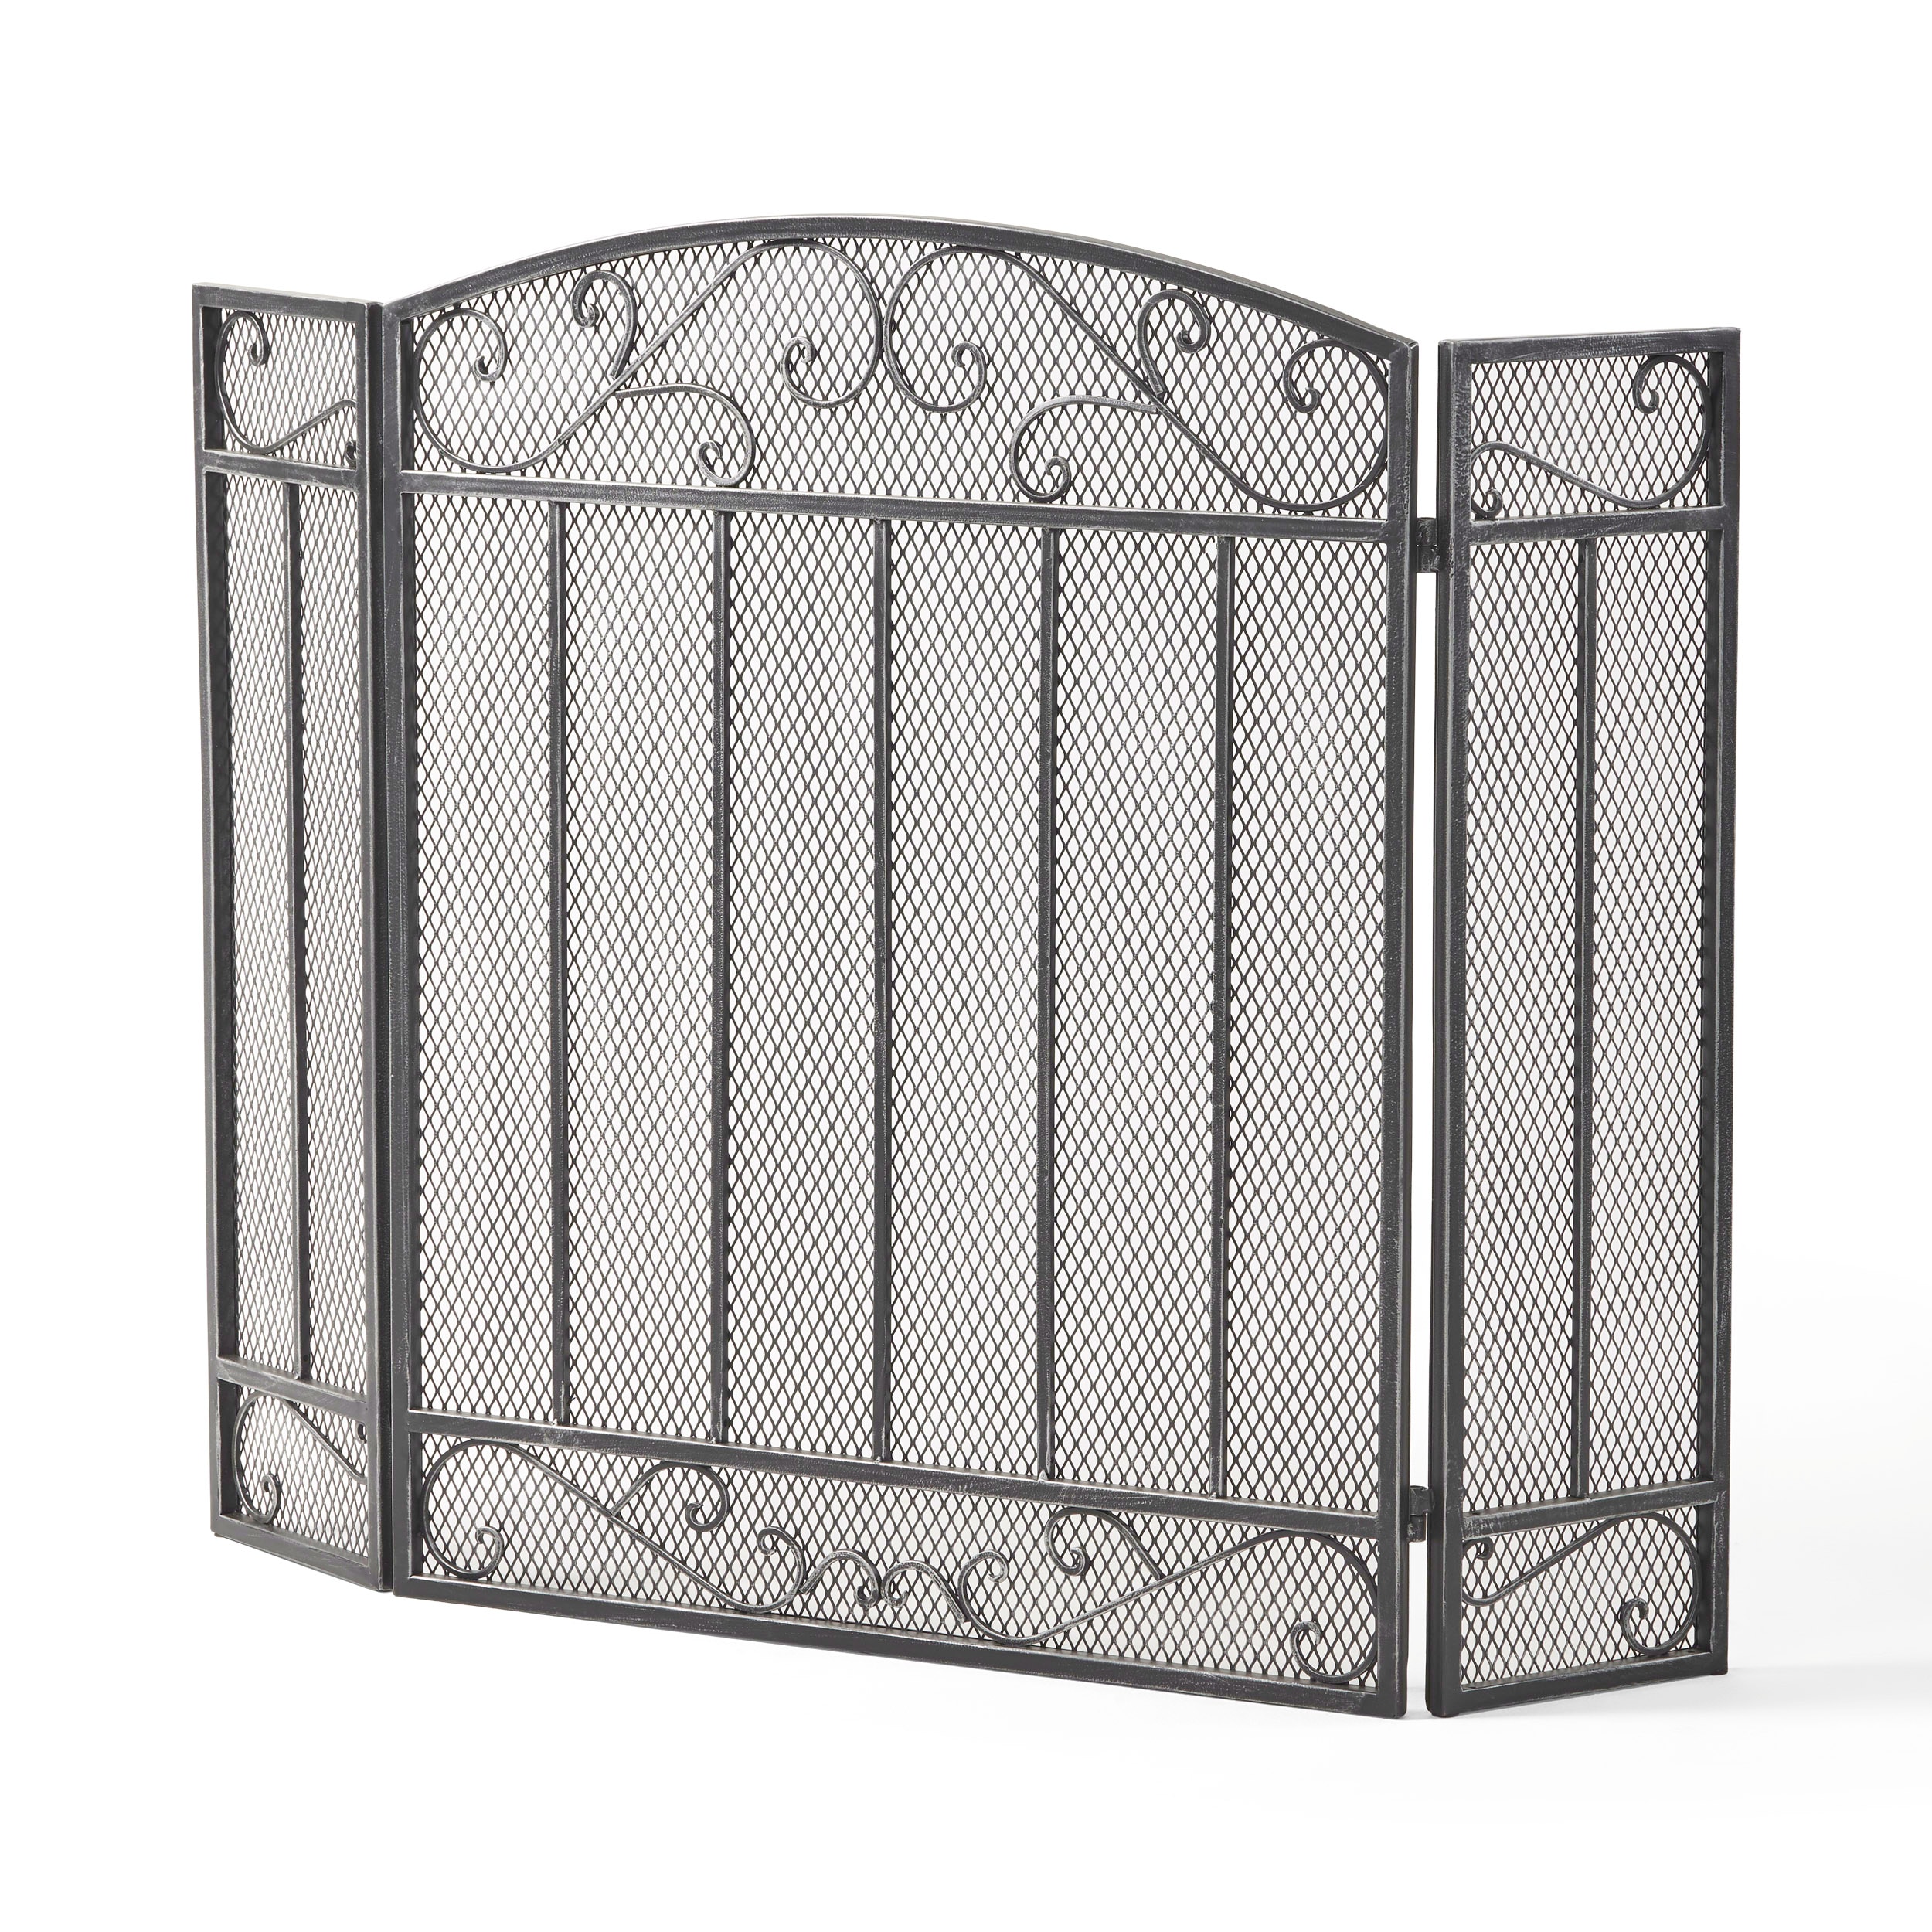 Cheswold Contemporary Three Panel Iron Firescreen, Black Silver Finish | - Best Selling Home Decor 309109